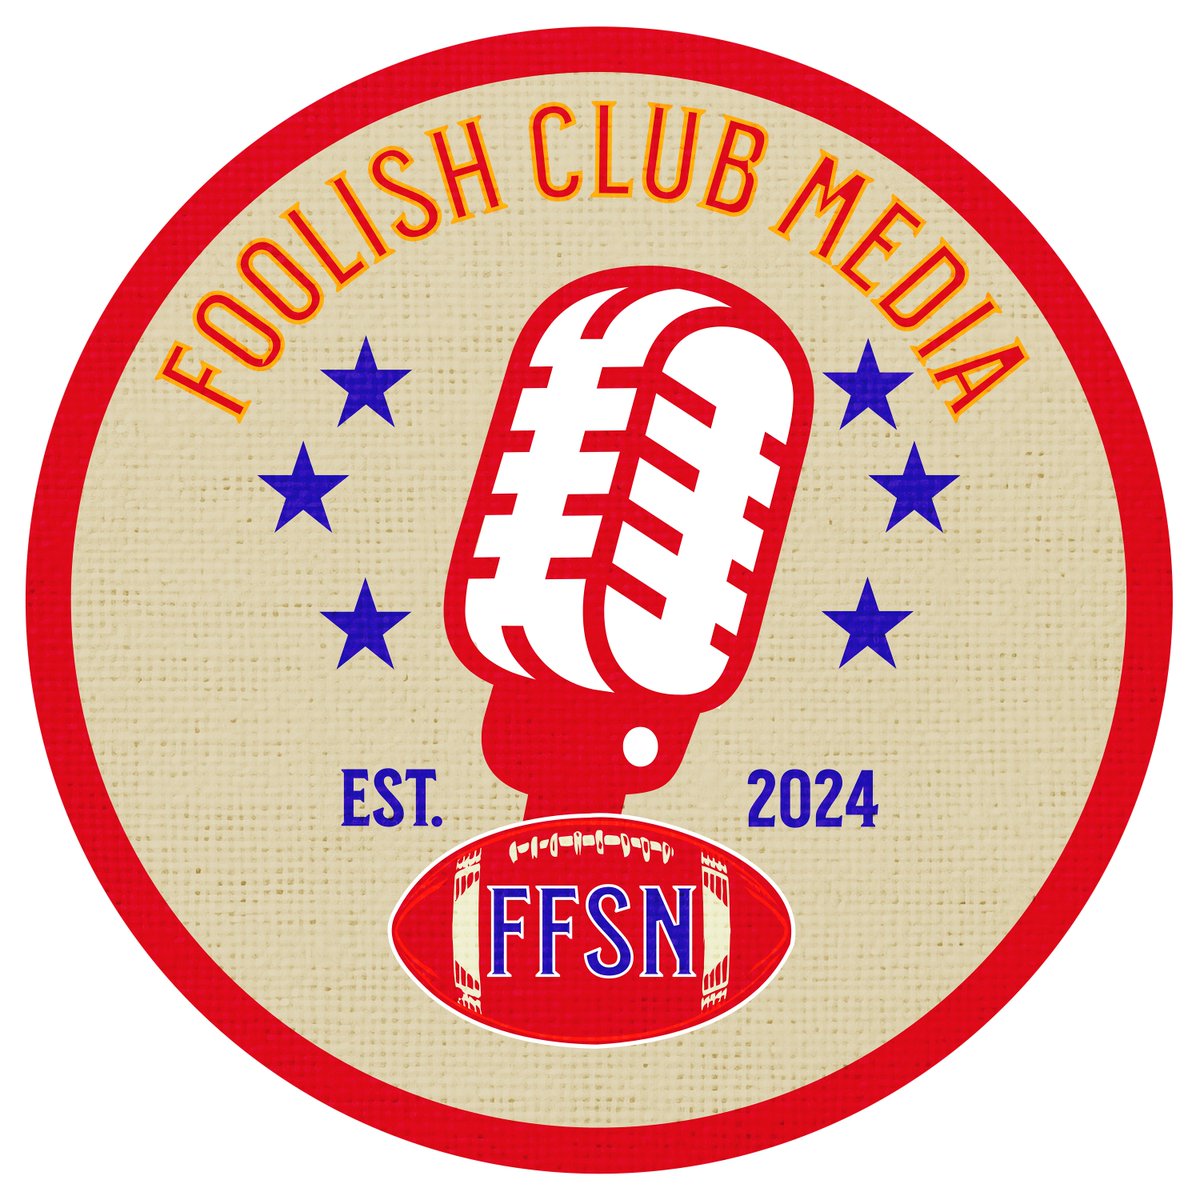 Welcome to Foolish Club Media a new podcast network covering the Kansas City #Chiefs with some familiar voices and shows. Apple: podcasts.apple.com/us/podcast/foo… Spotify: open.spotify.com/show/3xrylyDOn…